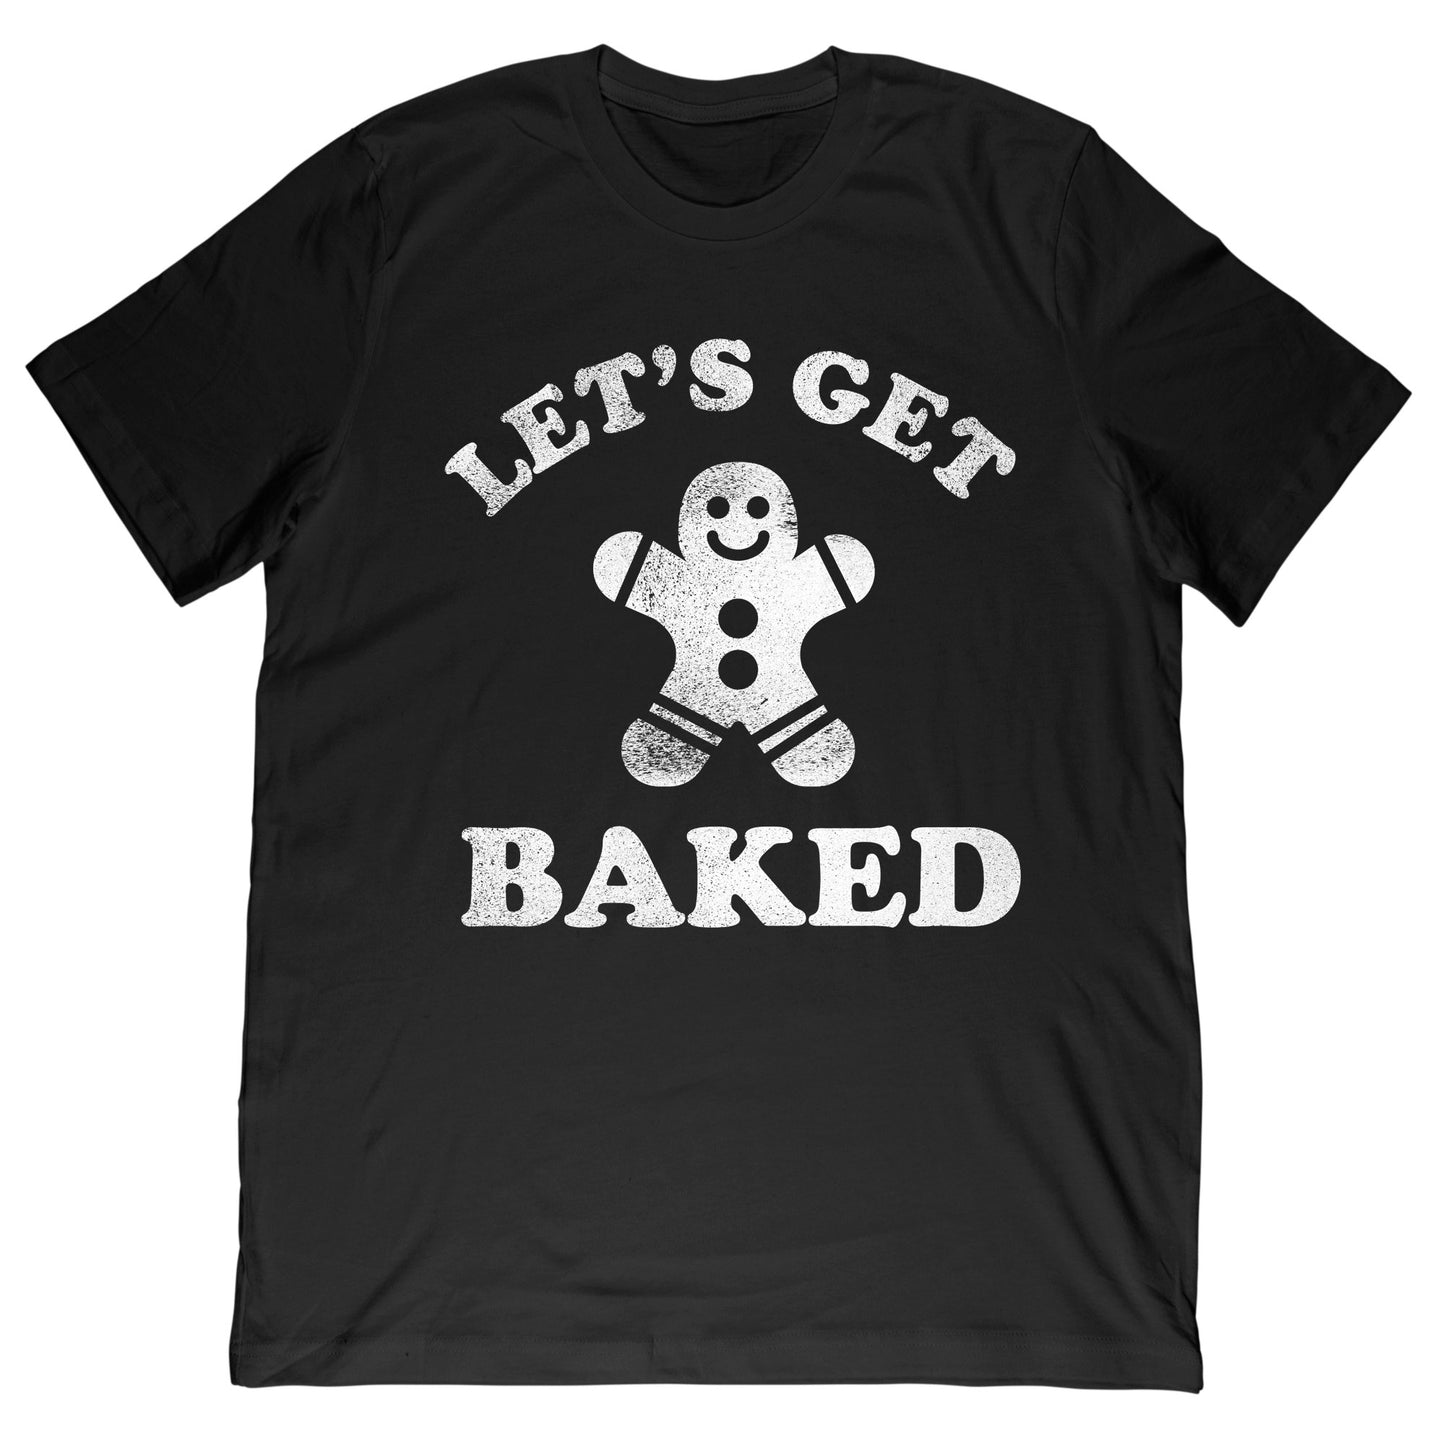 Let’s Get Baked T-Shirt